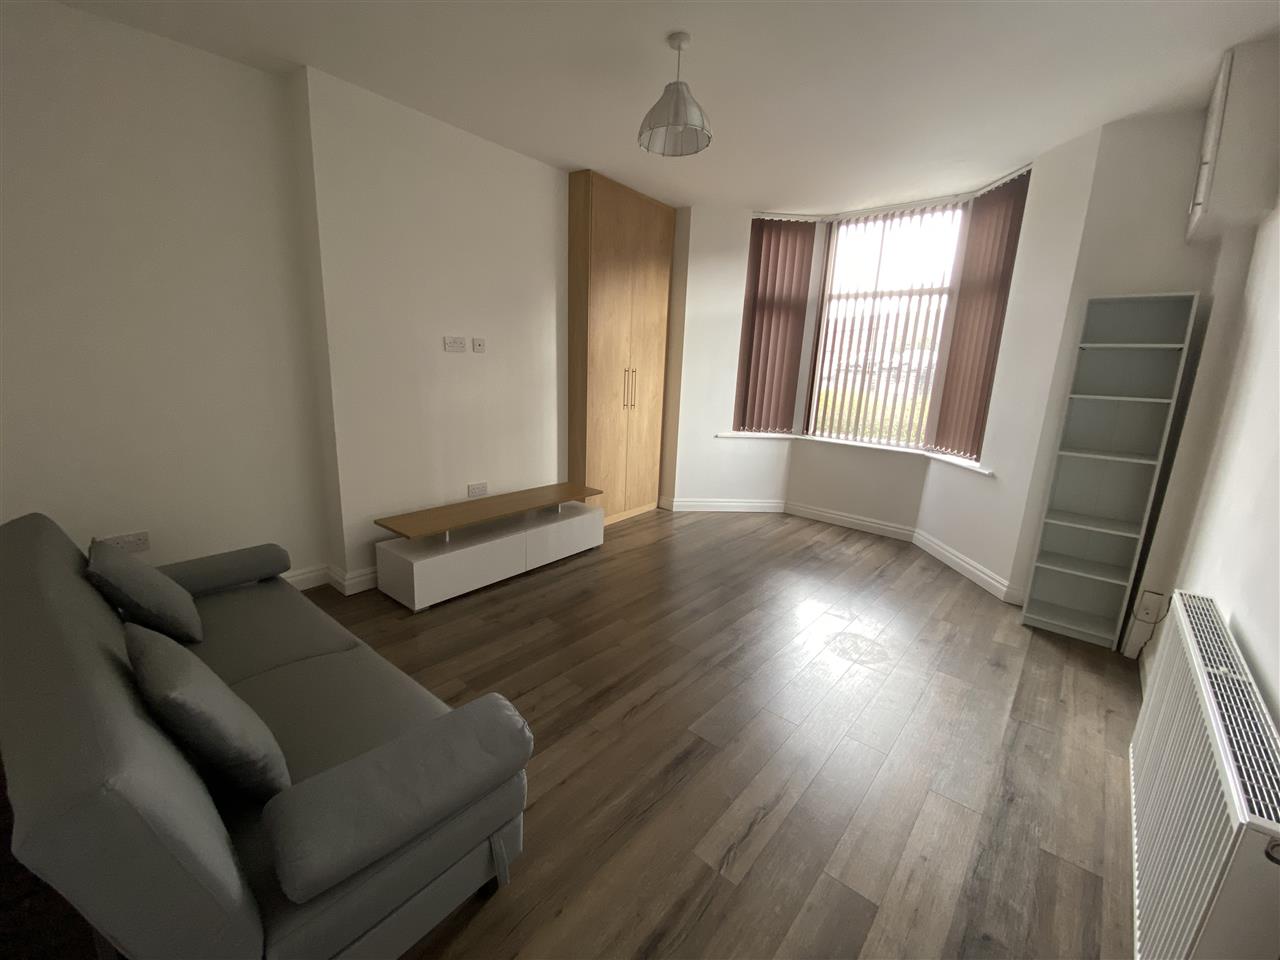 2 bed apartment to rent in A West Street, Chorley, Chorley 2